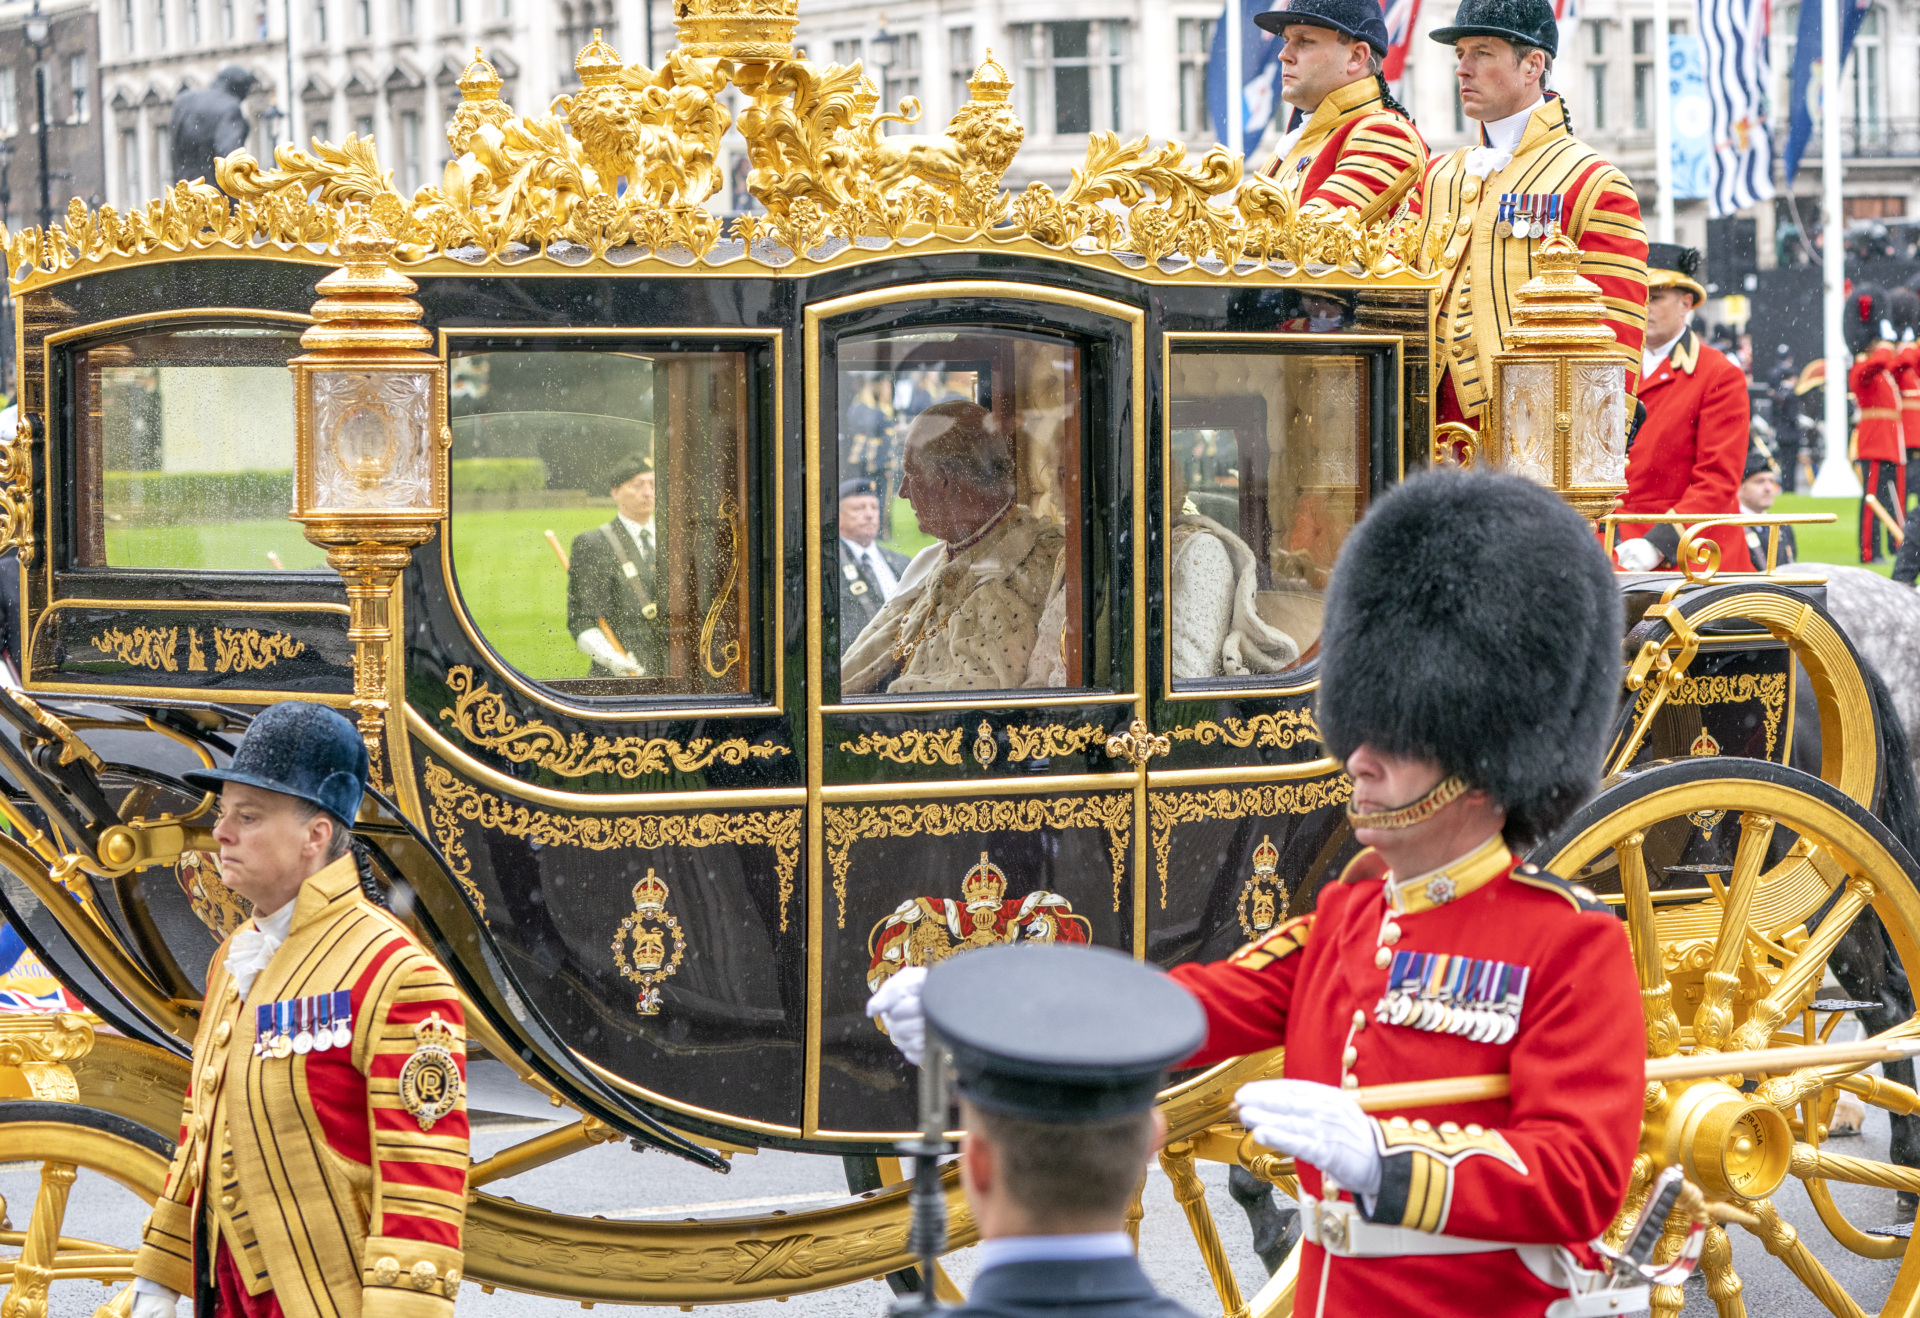 LONDON, ENGLAND - MAY 06: King Charles III and Camilla, Queen Consort are carried in the Diamond Jubilee State Coach as the King's procession passes Parliament Square ahead of the Coronation at Westminster Abbey on May 6, 2023 in London, England. The Coronation of Charles III and his wife, Camilla, as King and Queen of the United Kingdom of Great Britain and Northern Ireland, and the other Commonwealth realms takes place at Westminster Abbey today. Charles acceded to the throne on 8 September 2022, upon the death of his mother, Elizabeth II. (Photo by Jane Barlow - WPA Pool/Getty Images)